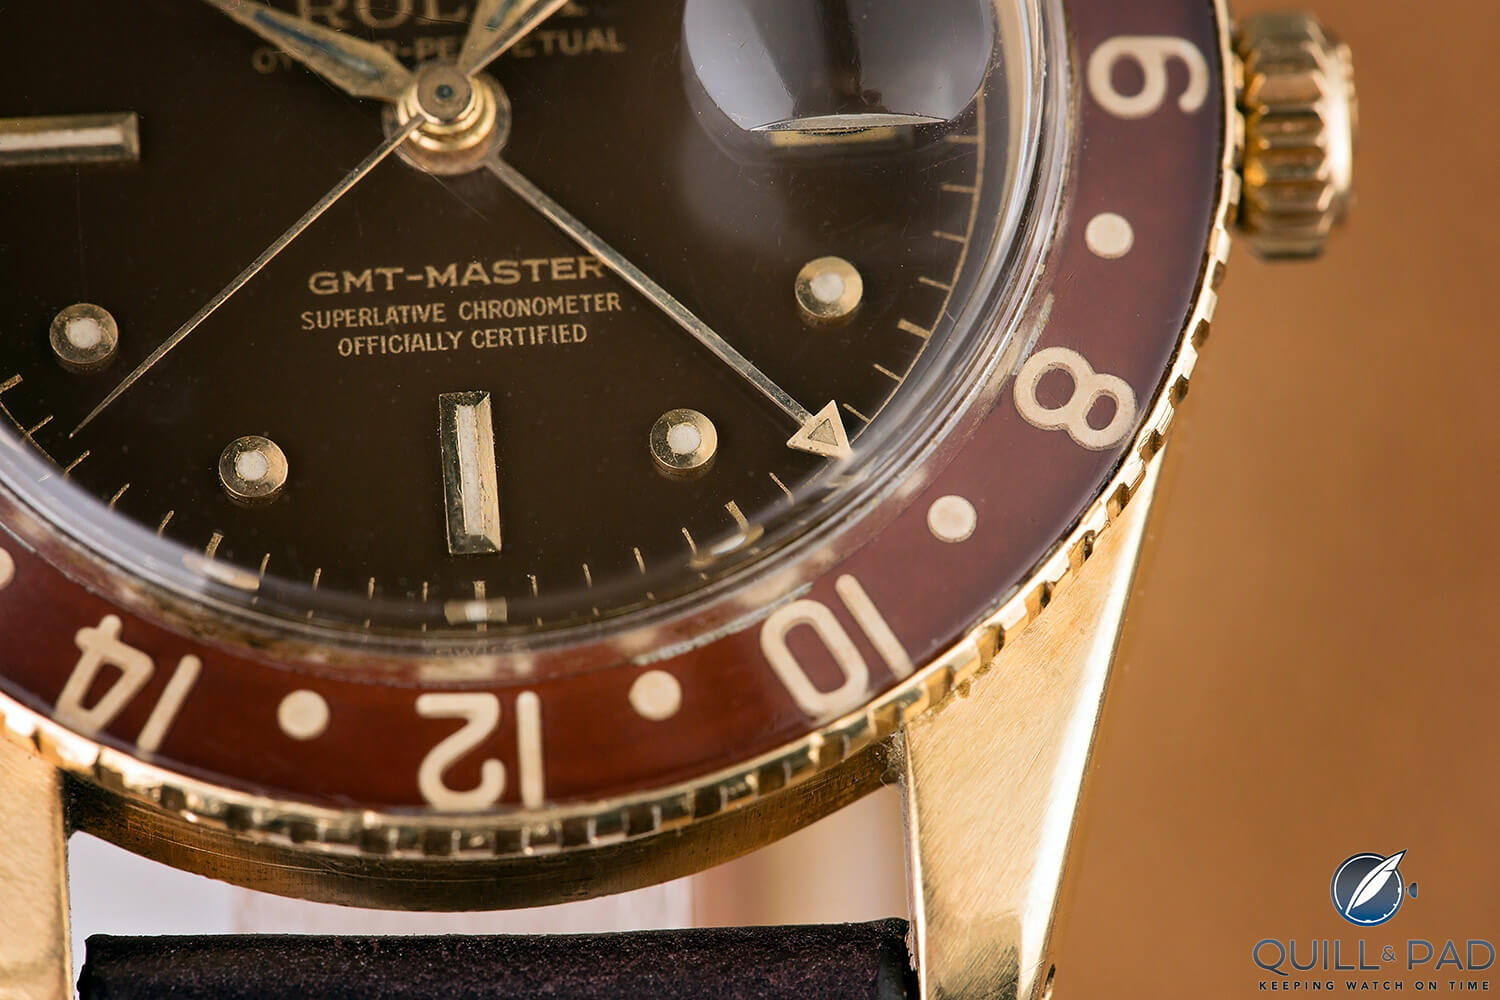 Dial and bezel details on the Rolex GMT-Master Reference 6542 (photo courtesy Bobs Watches)